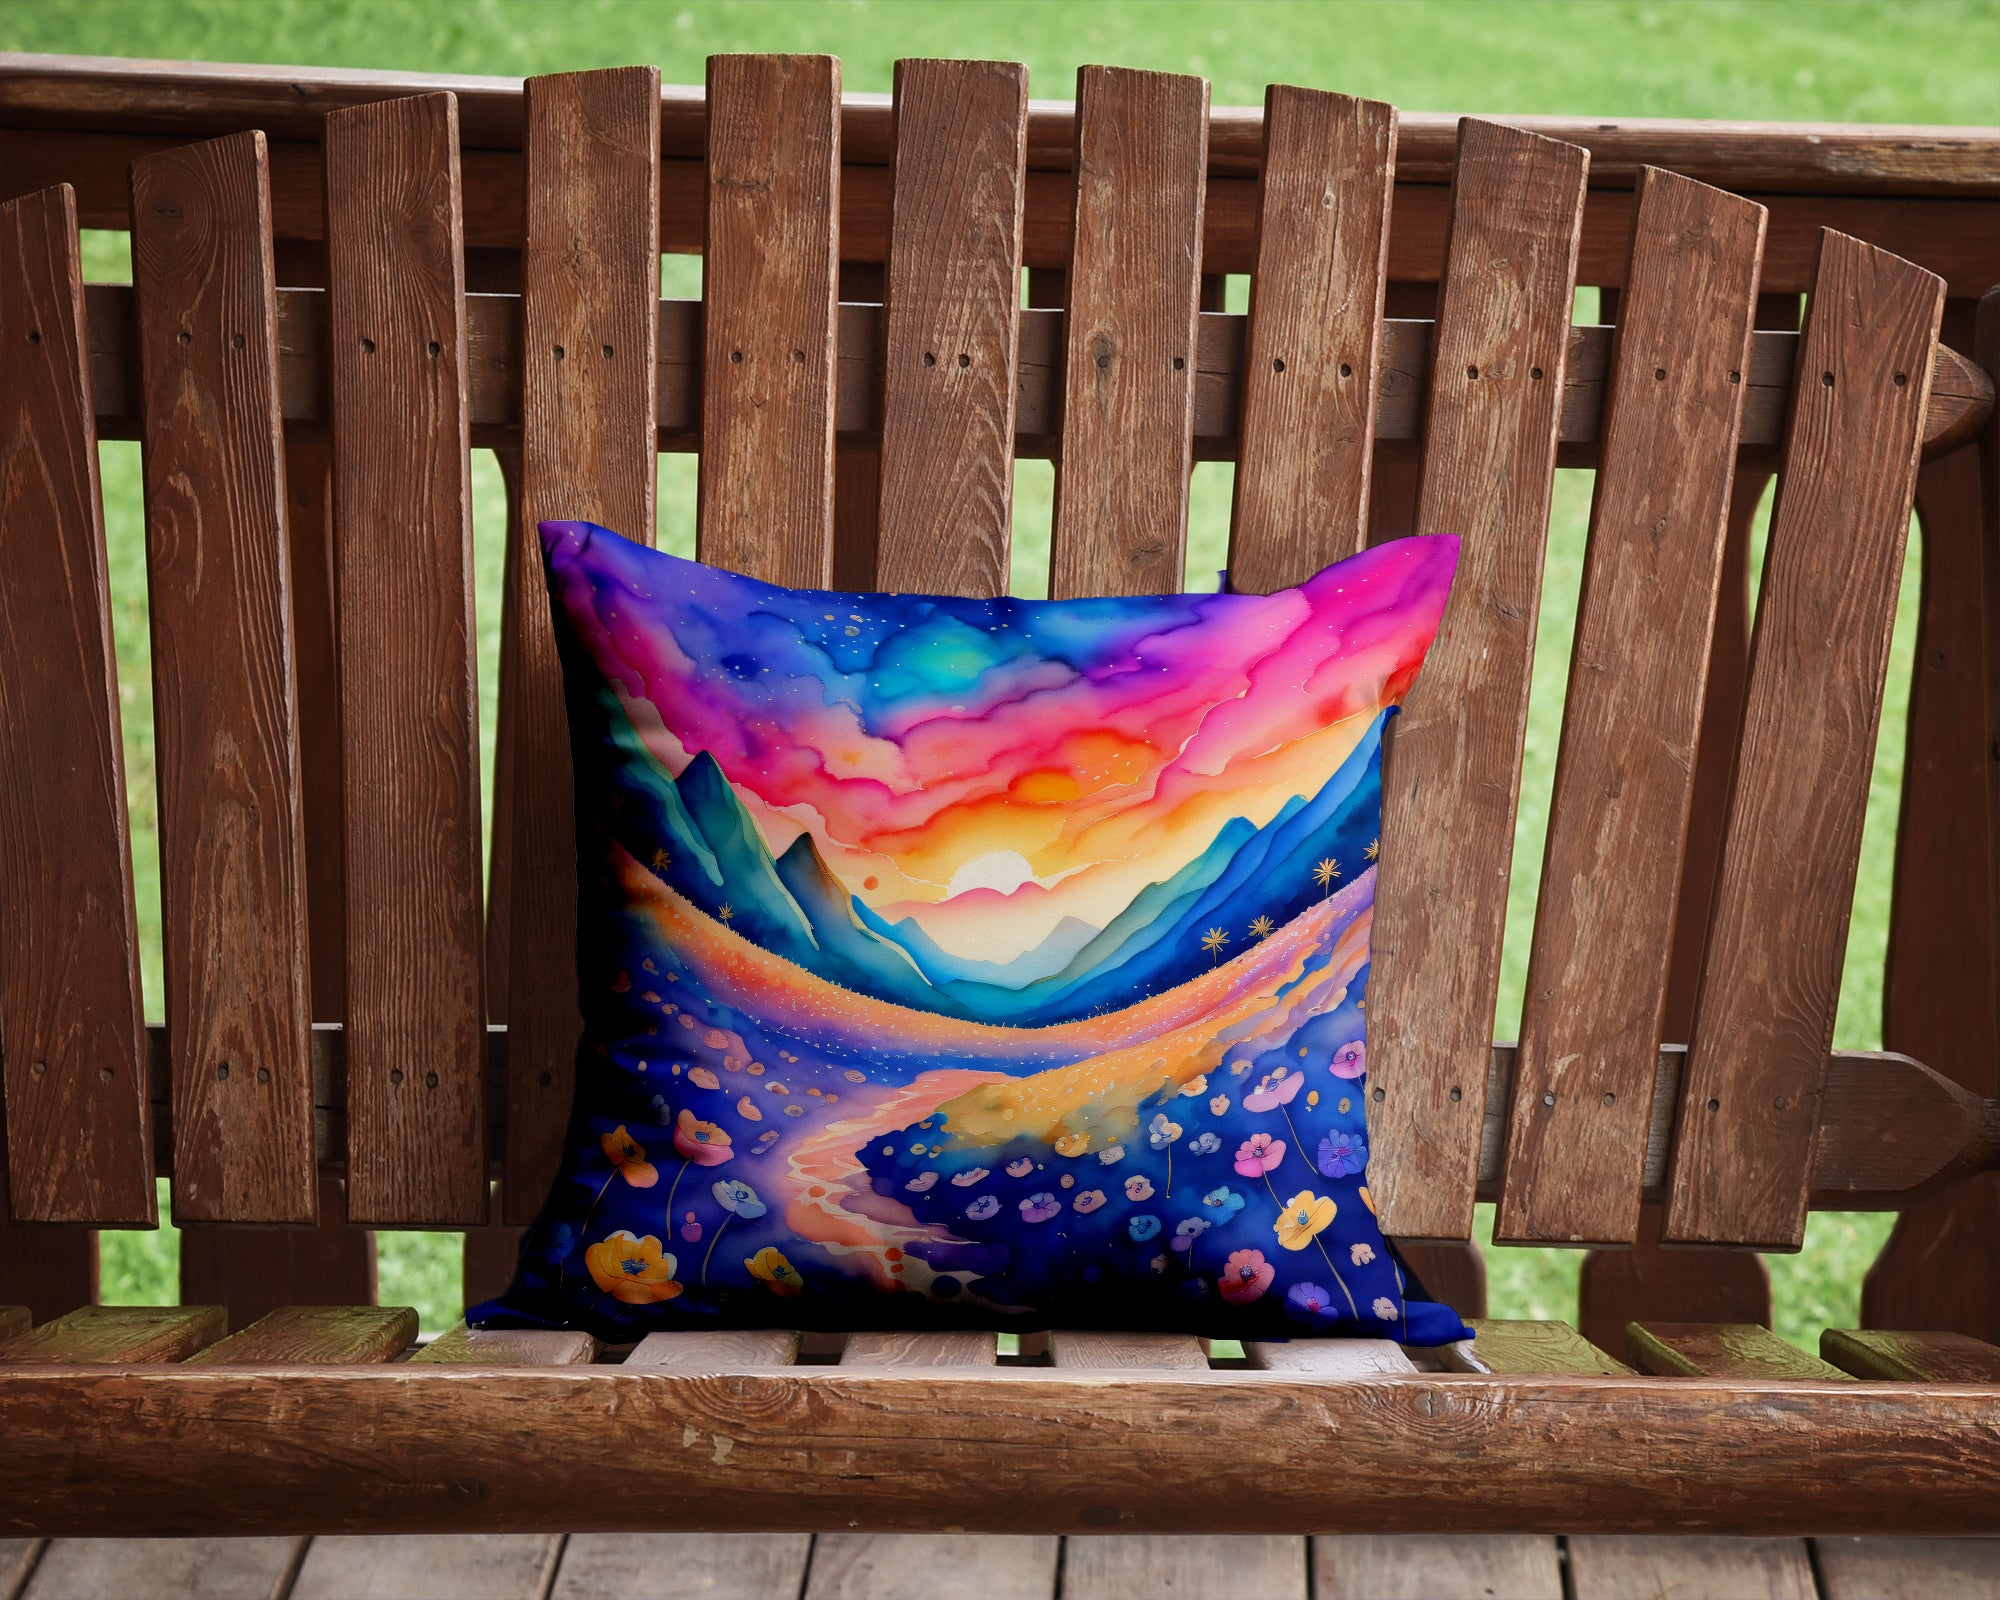 Colorful Periwinkles Fabric Decorative Pillow